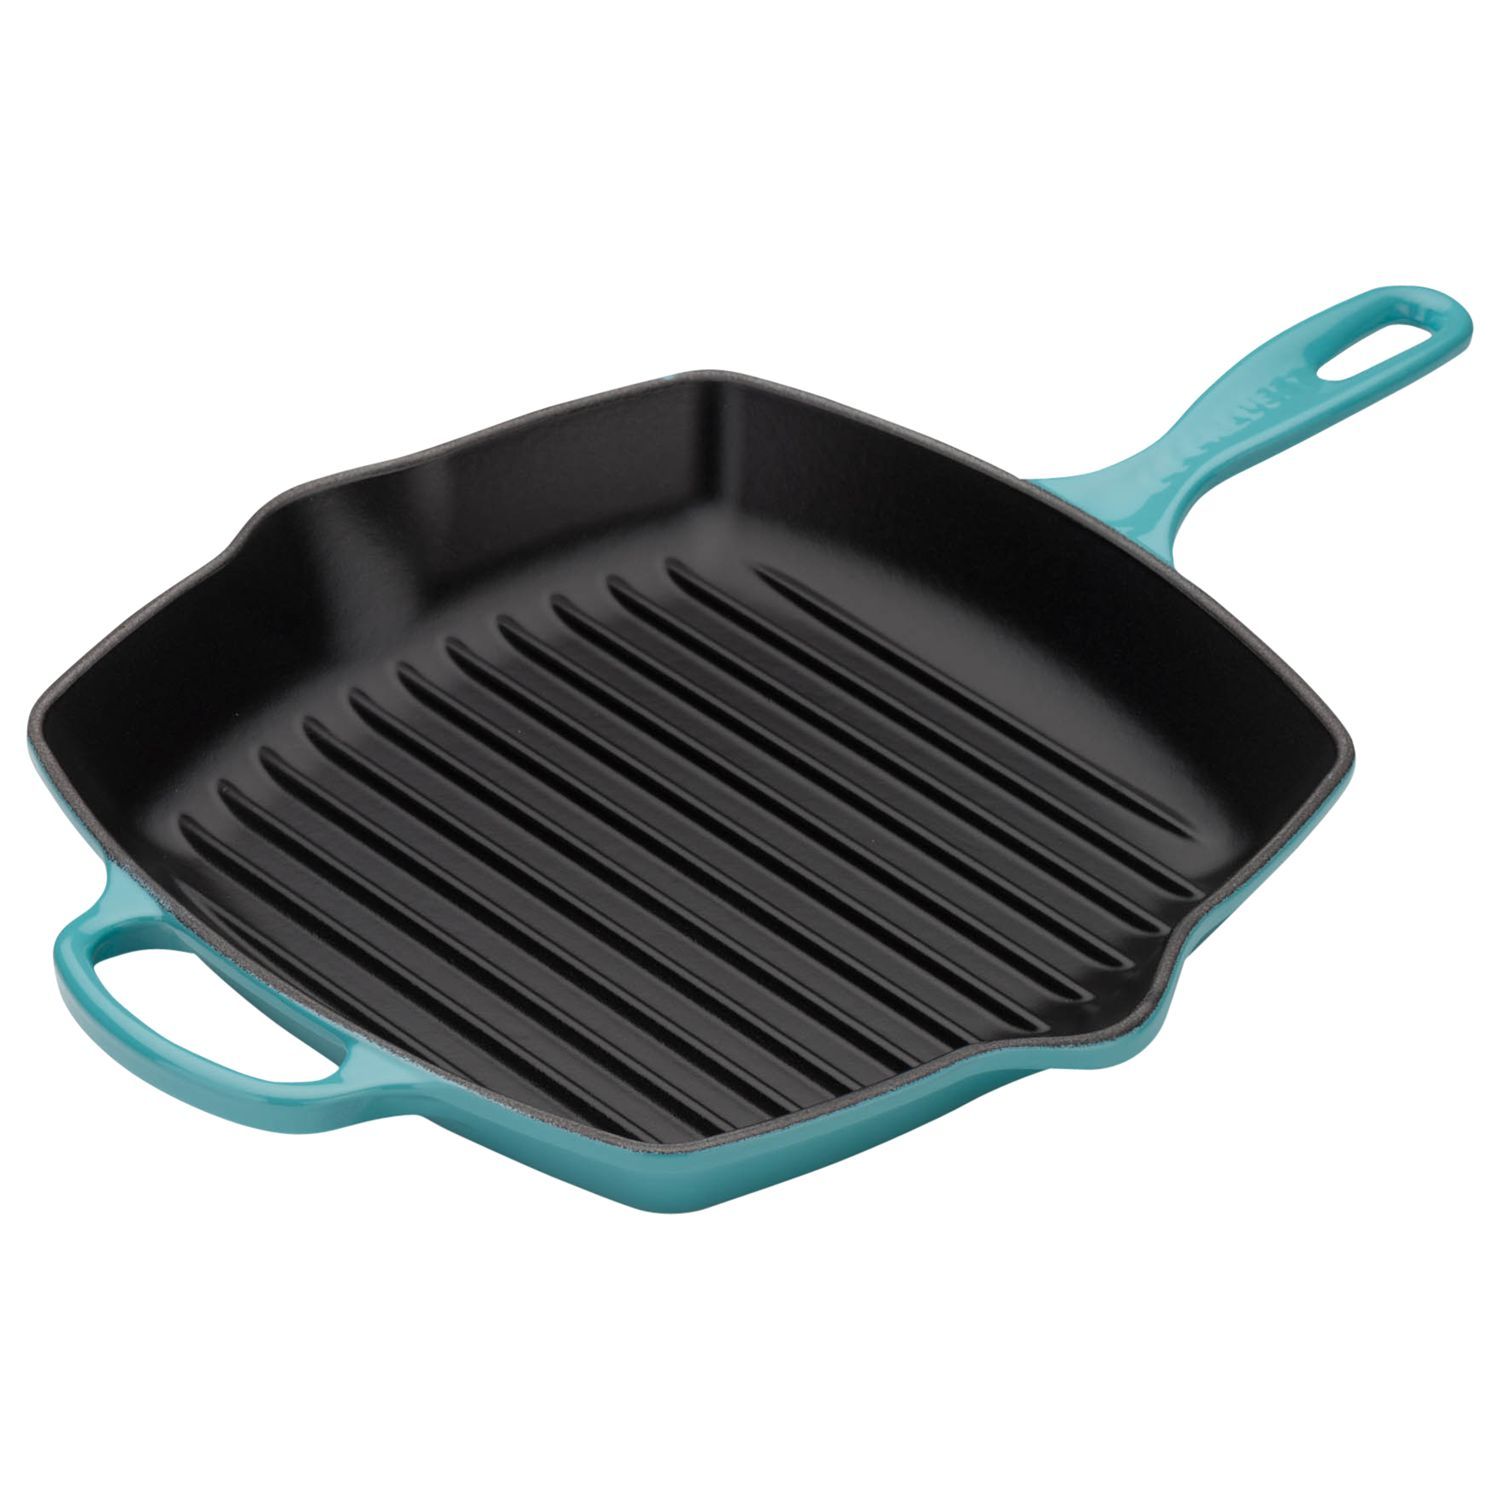 Meats Bacon and Fish OBR KING Cast Iron Skillet 9 inch Square Grill Pan with Pour Spout Stove Top Griddle Pan for Grilling Steak